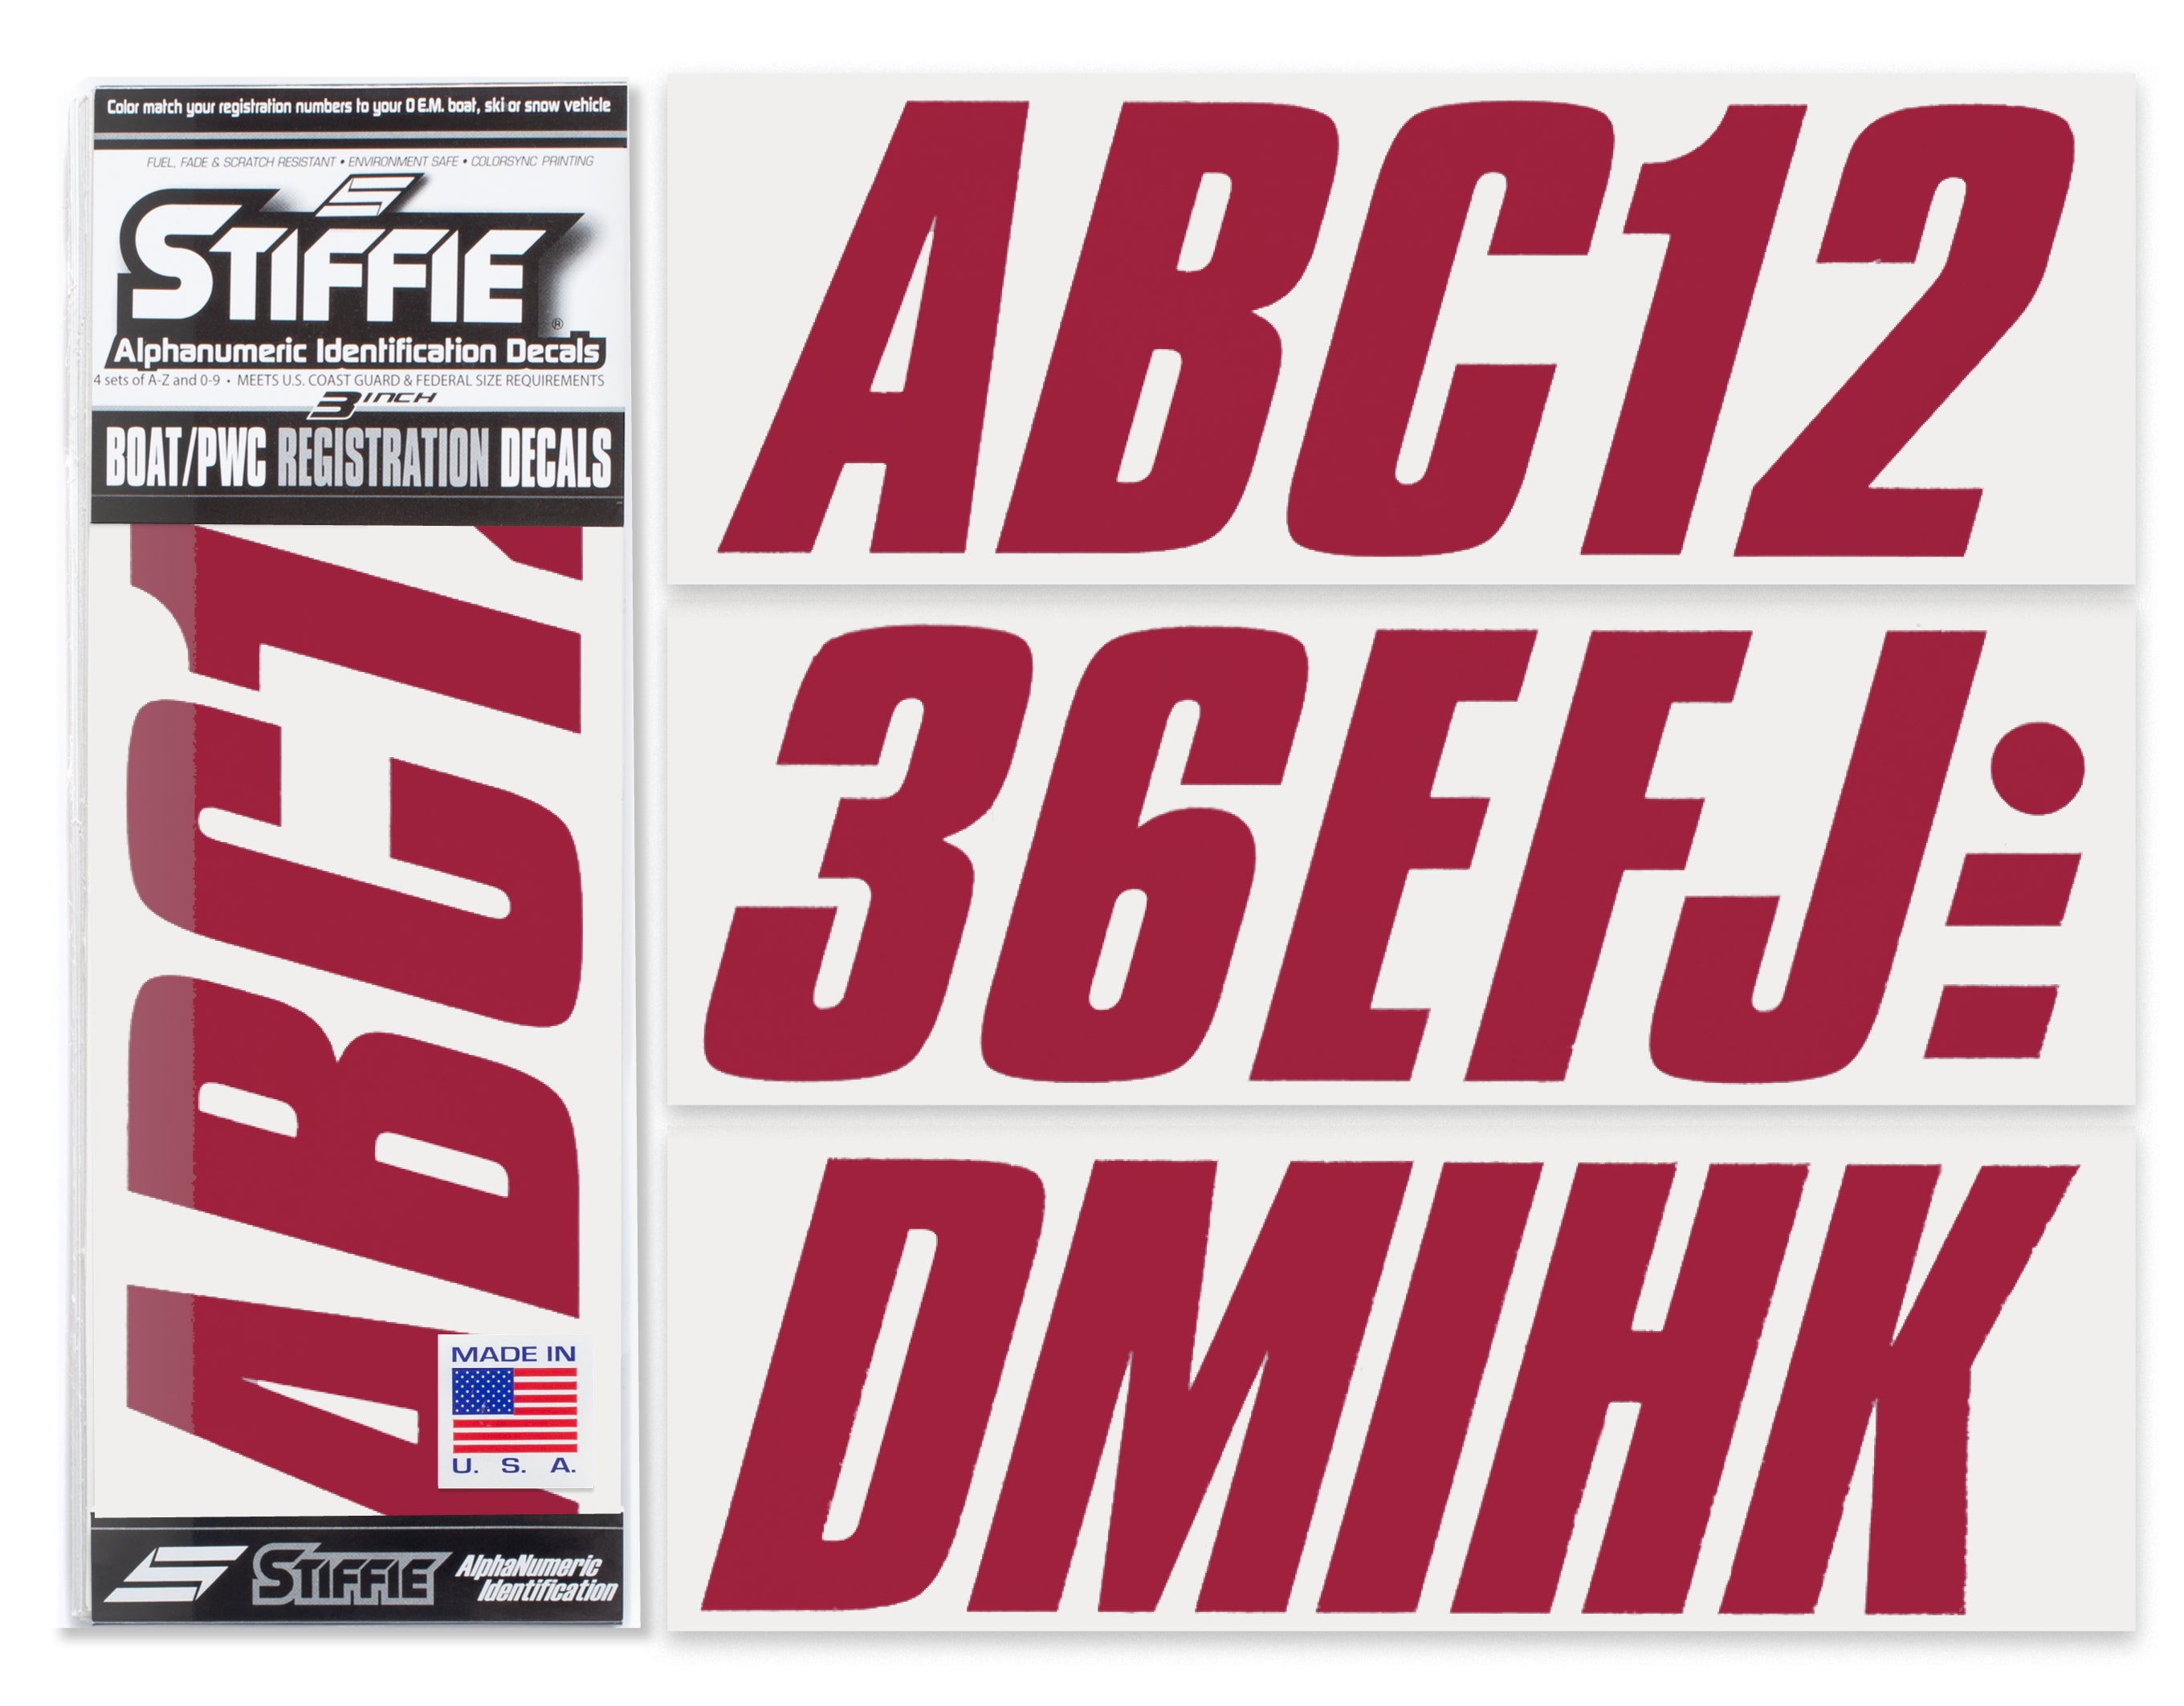 STIFFIE Shift Burgundy 3" ID Kit Alpha-Numeric Registration Identification Numbers Stickers Decals for Boats & Personal Watercraft